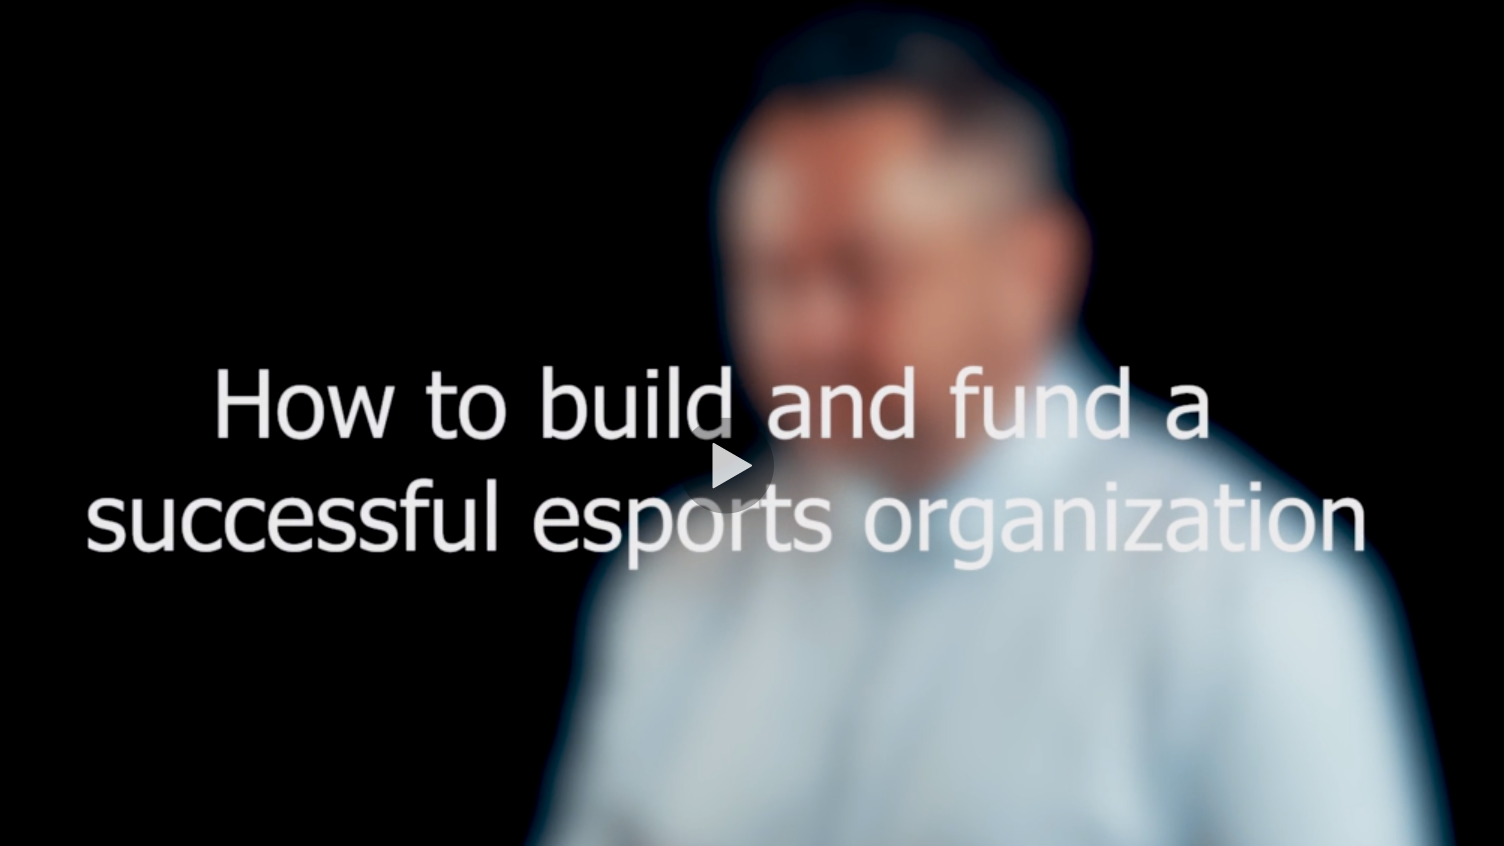 The complete guide to build & fund an esports organization